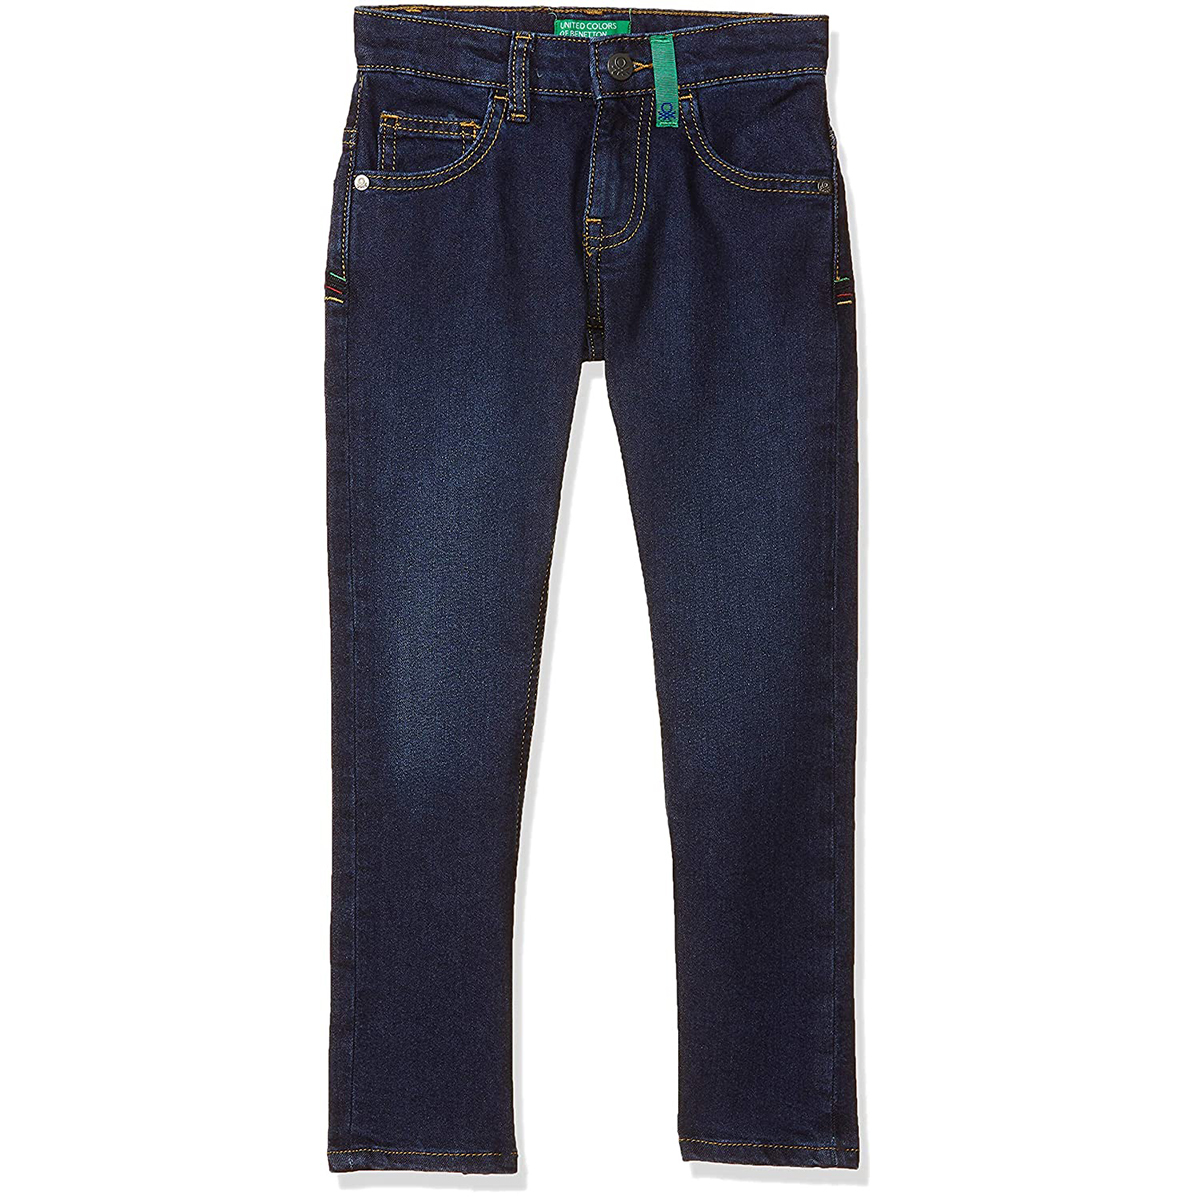 United Colors of Benetton Boy's Slim Fit Jeans- Navy Blue